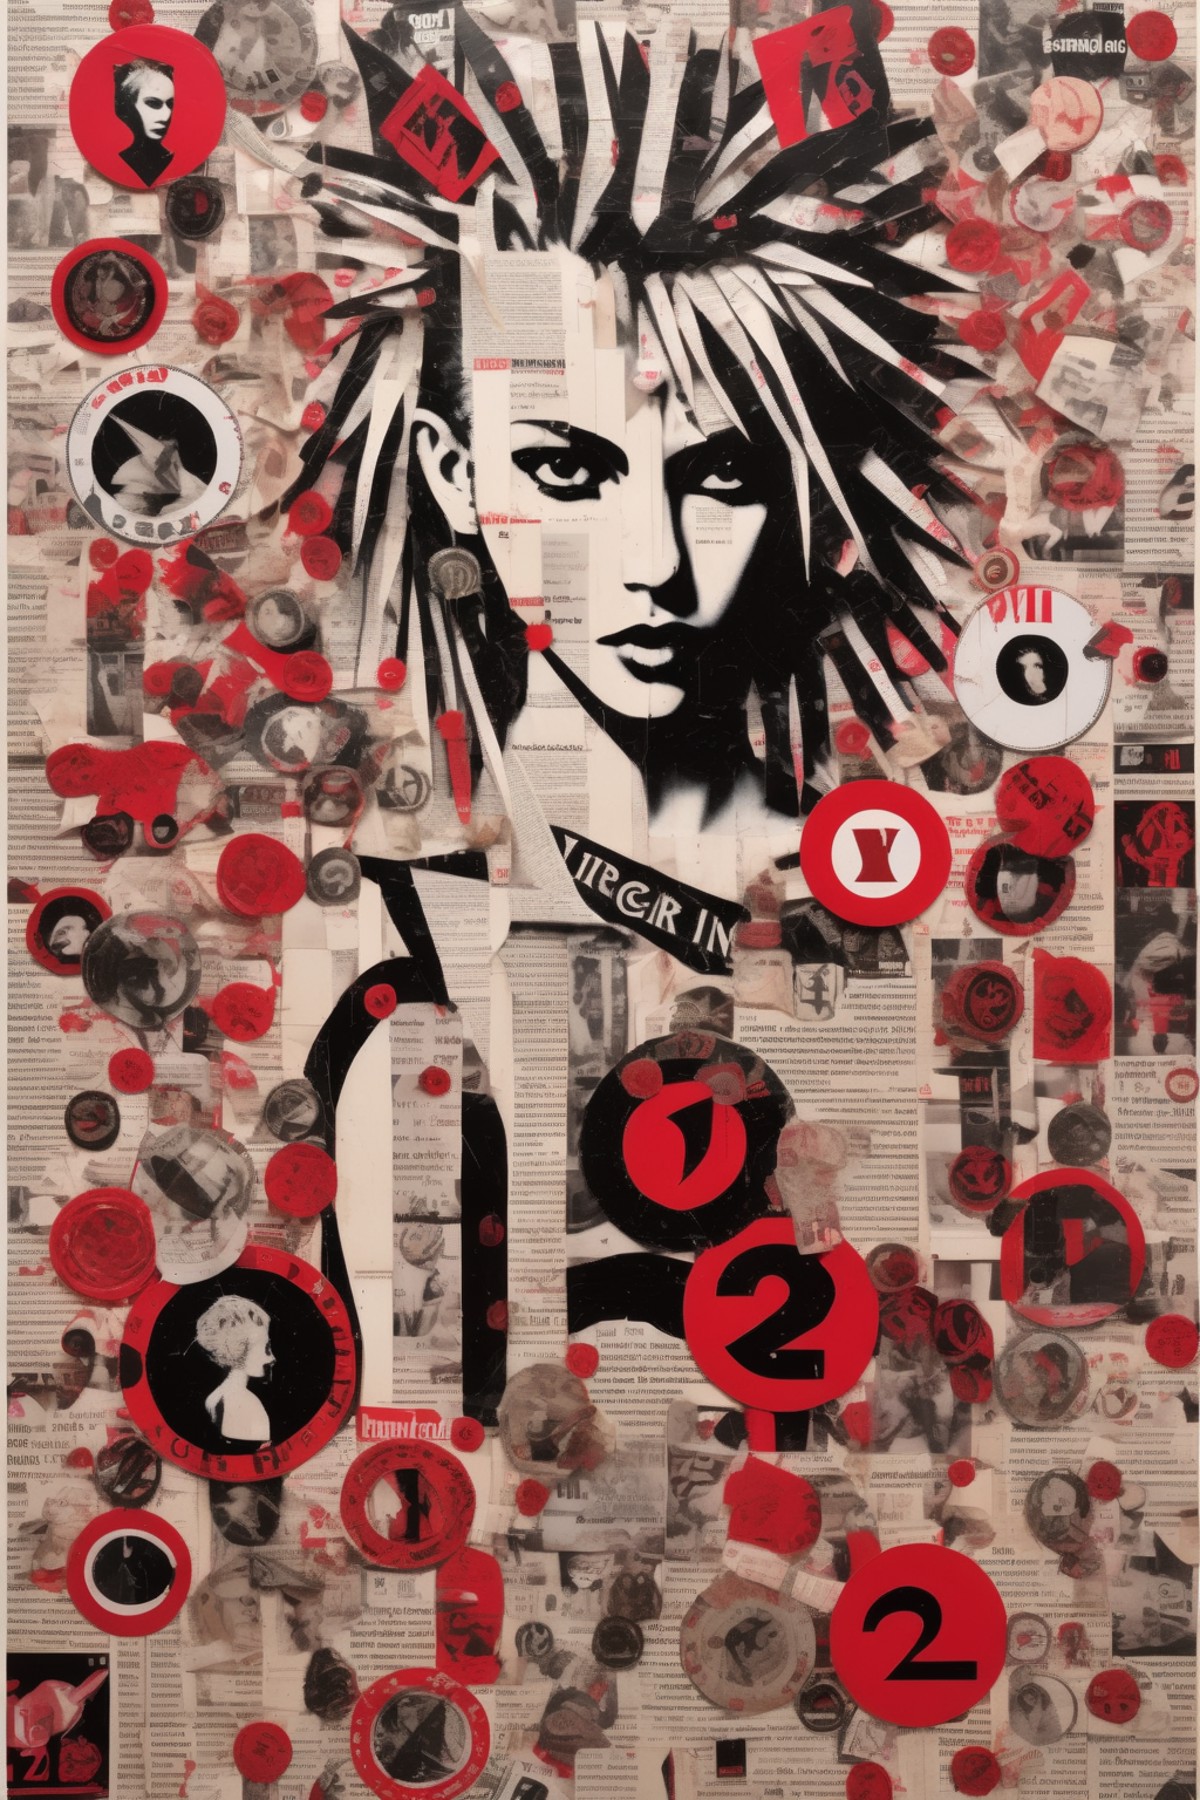 <lora:Punk Collage:1>Punk Collage - black, white and red, flat, 2D punk rock poster made up of magazine clippings that rep...